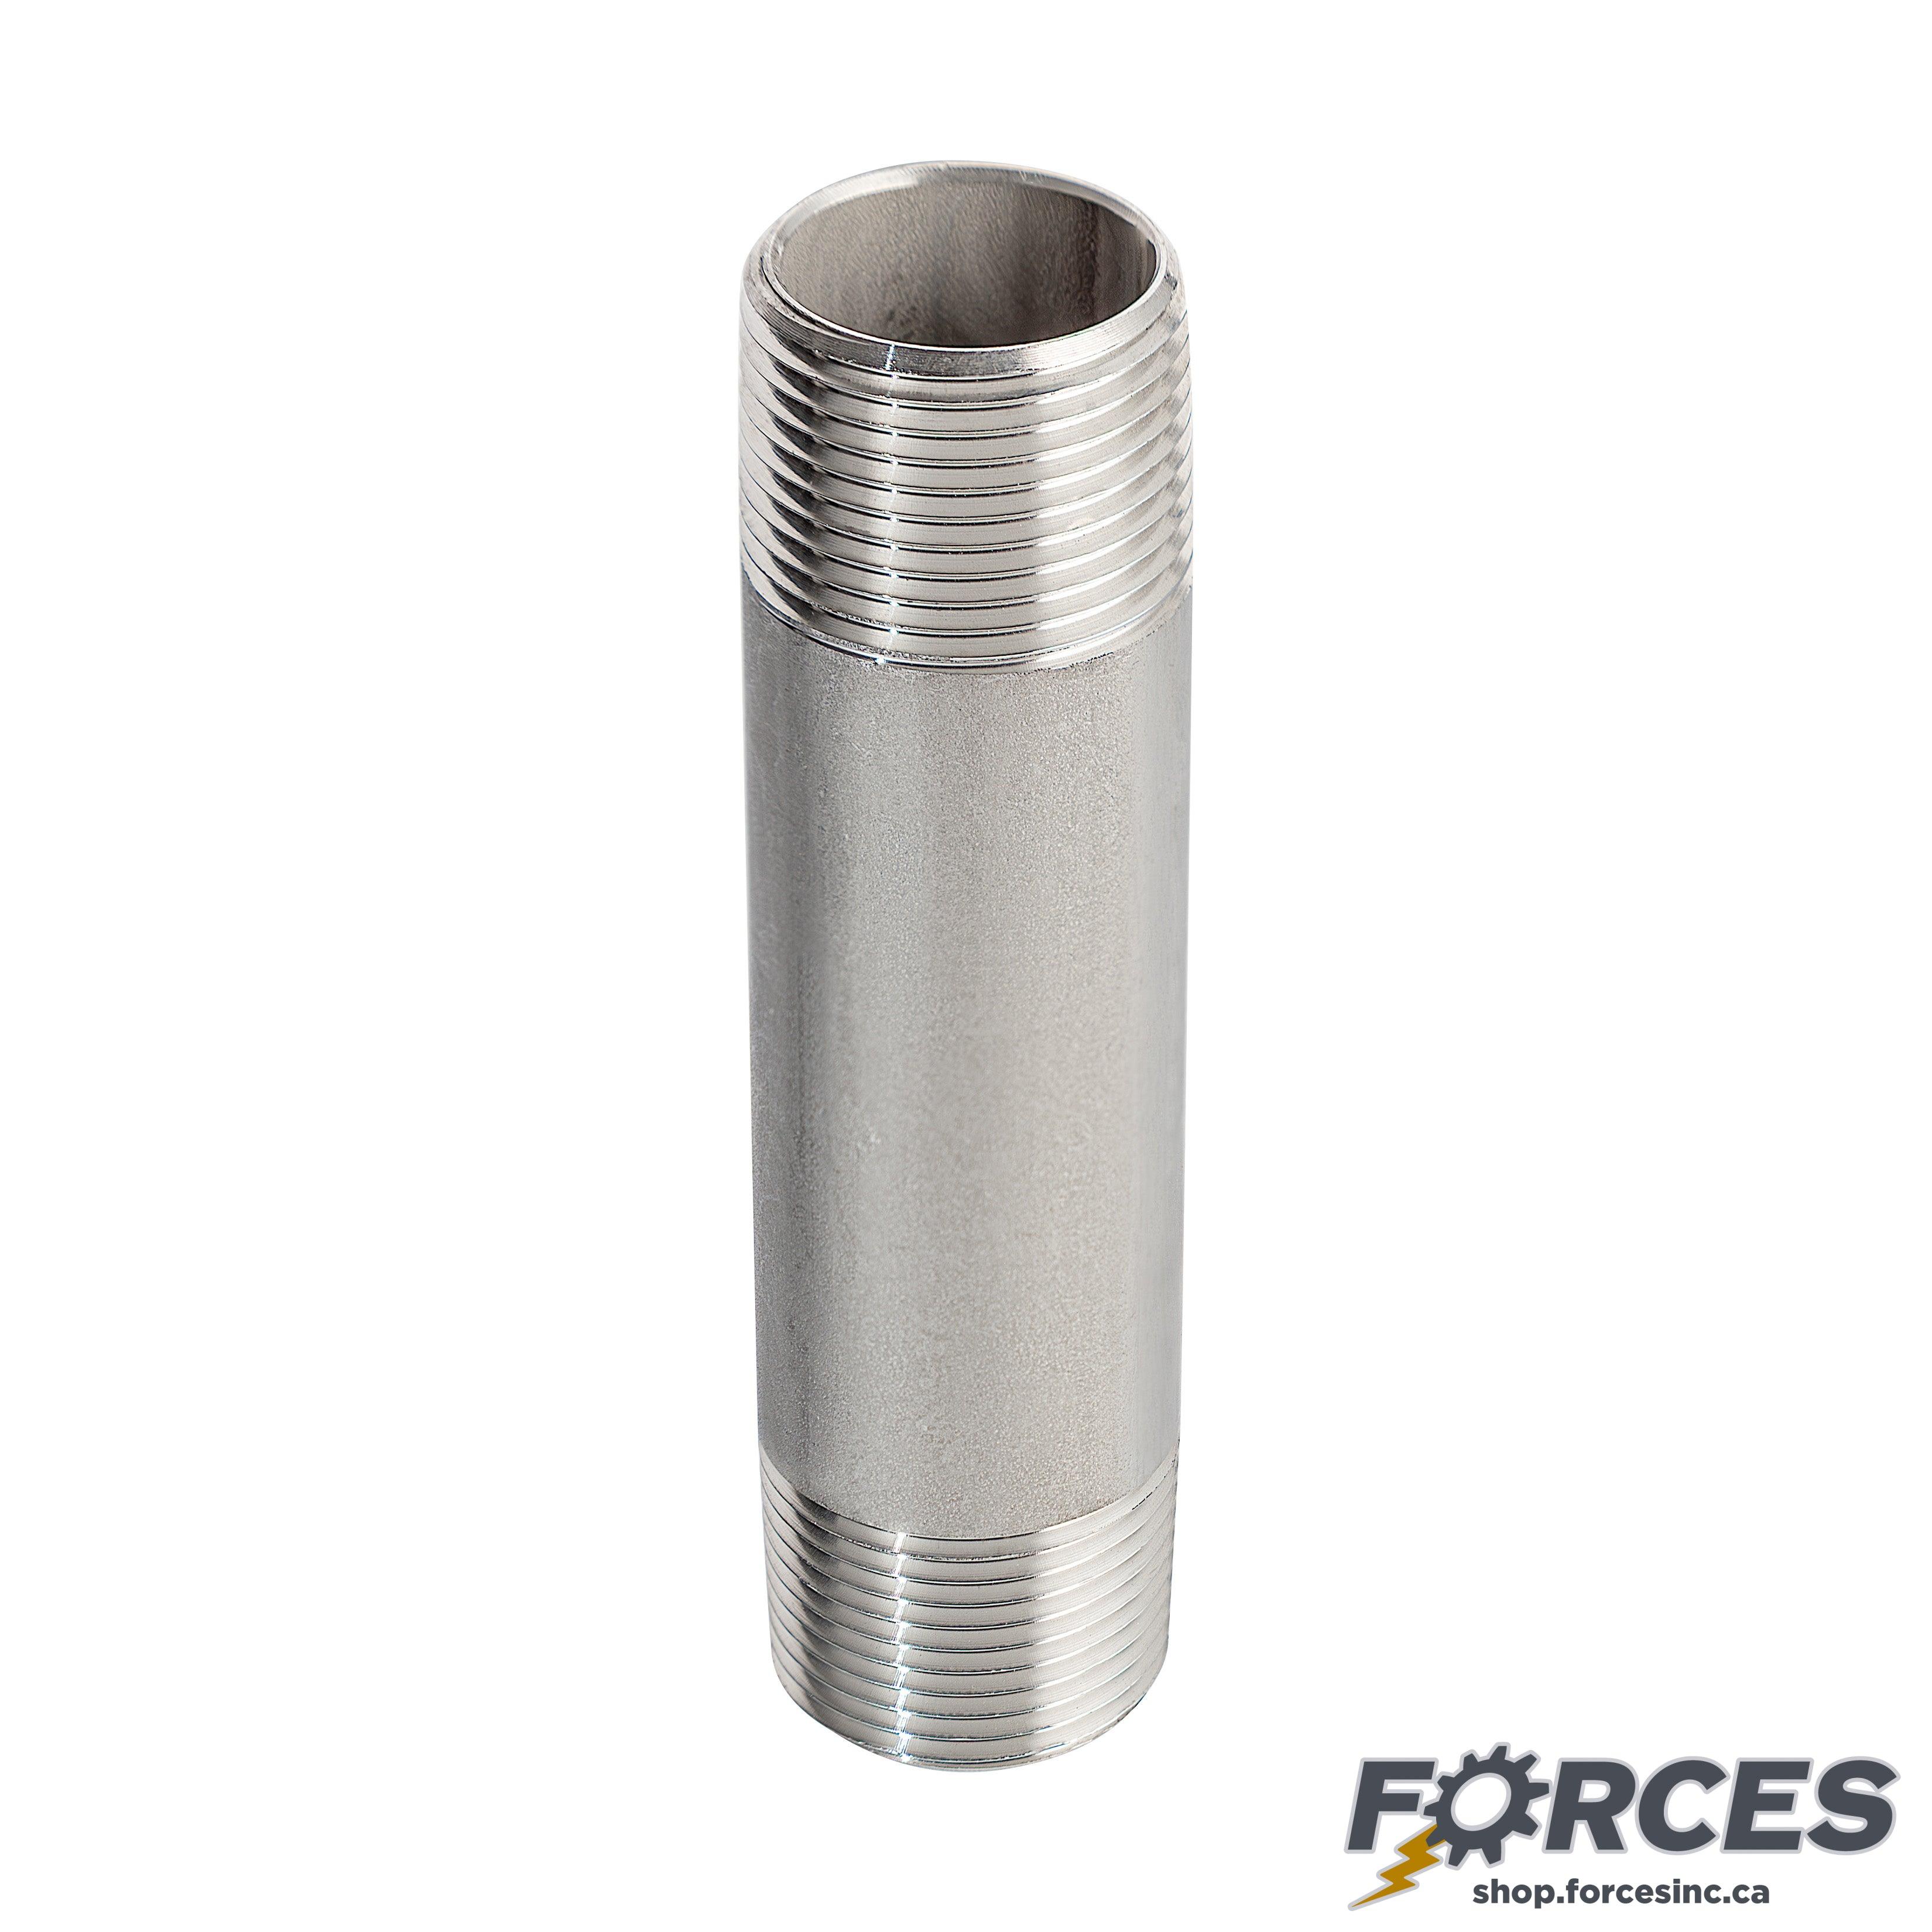 2" X 4" Long Nipple - Stainless Steel 316 - Forces Inc